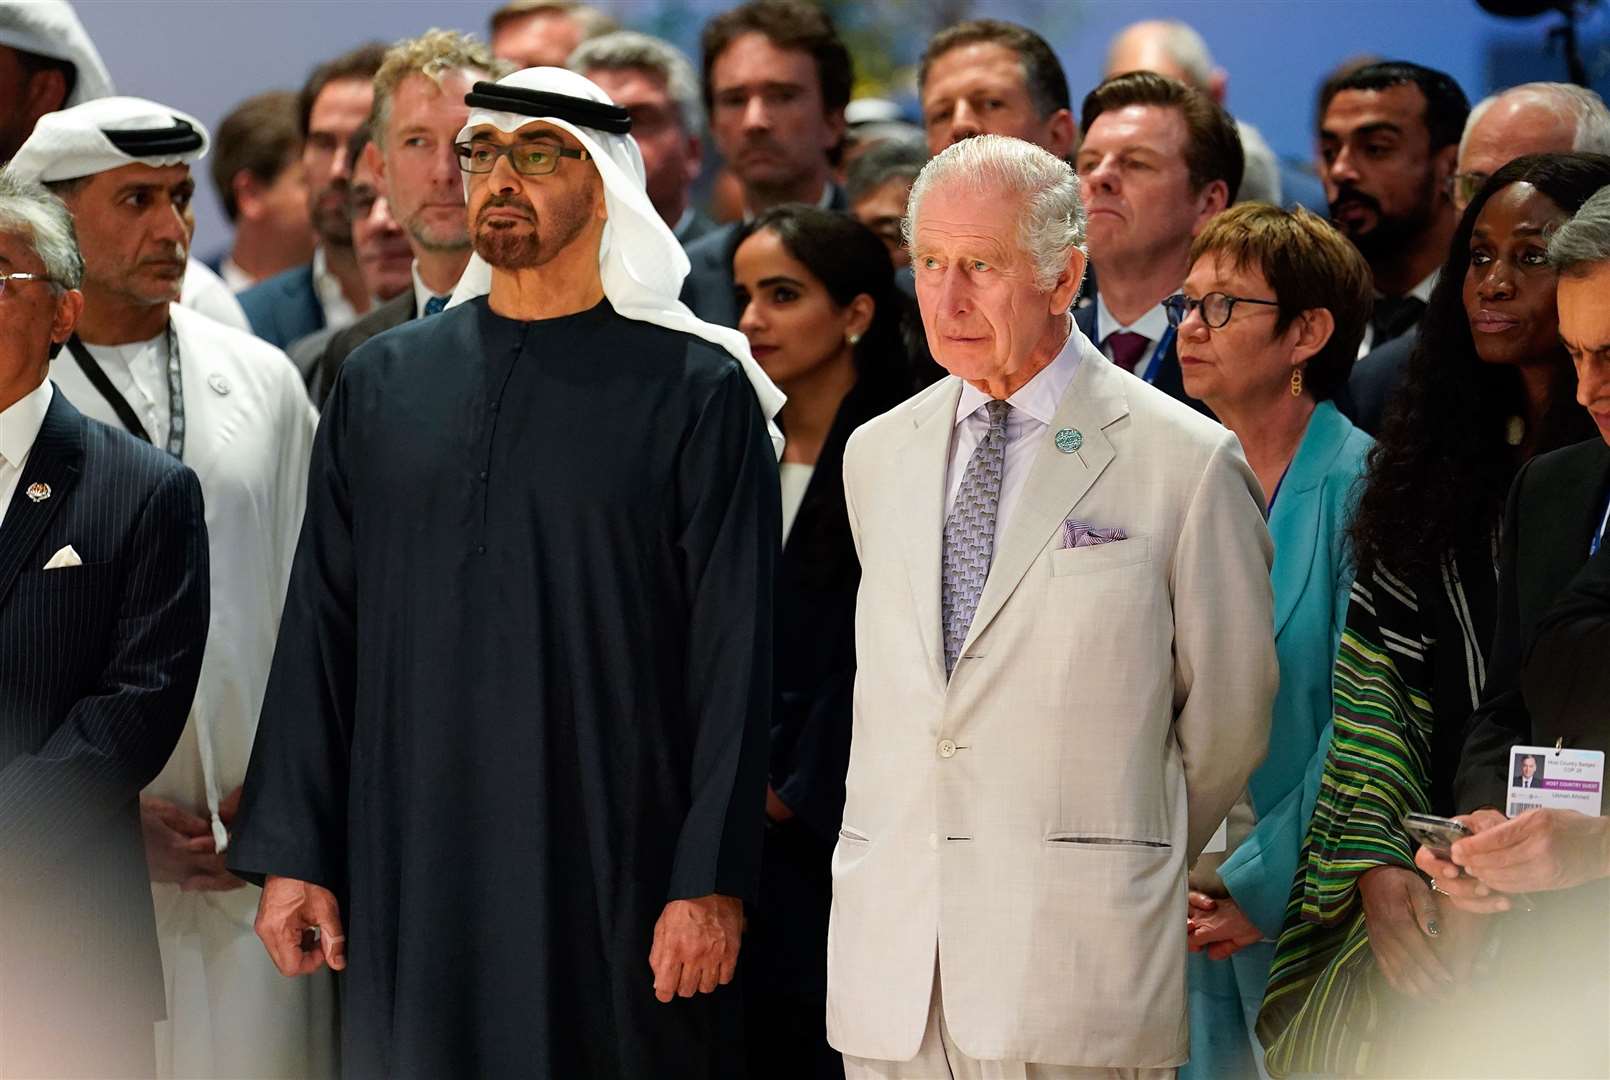 The King and Sheikh Mohammed bin Zayed Al Nahyan, President of the United Arab Emirates, on Thursday (Andrew Matthews/PA)